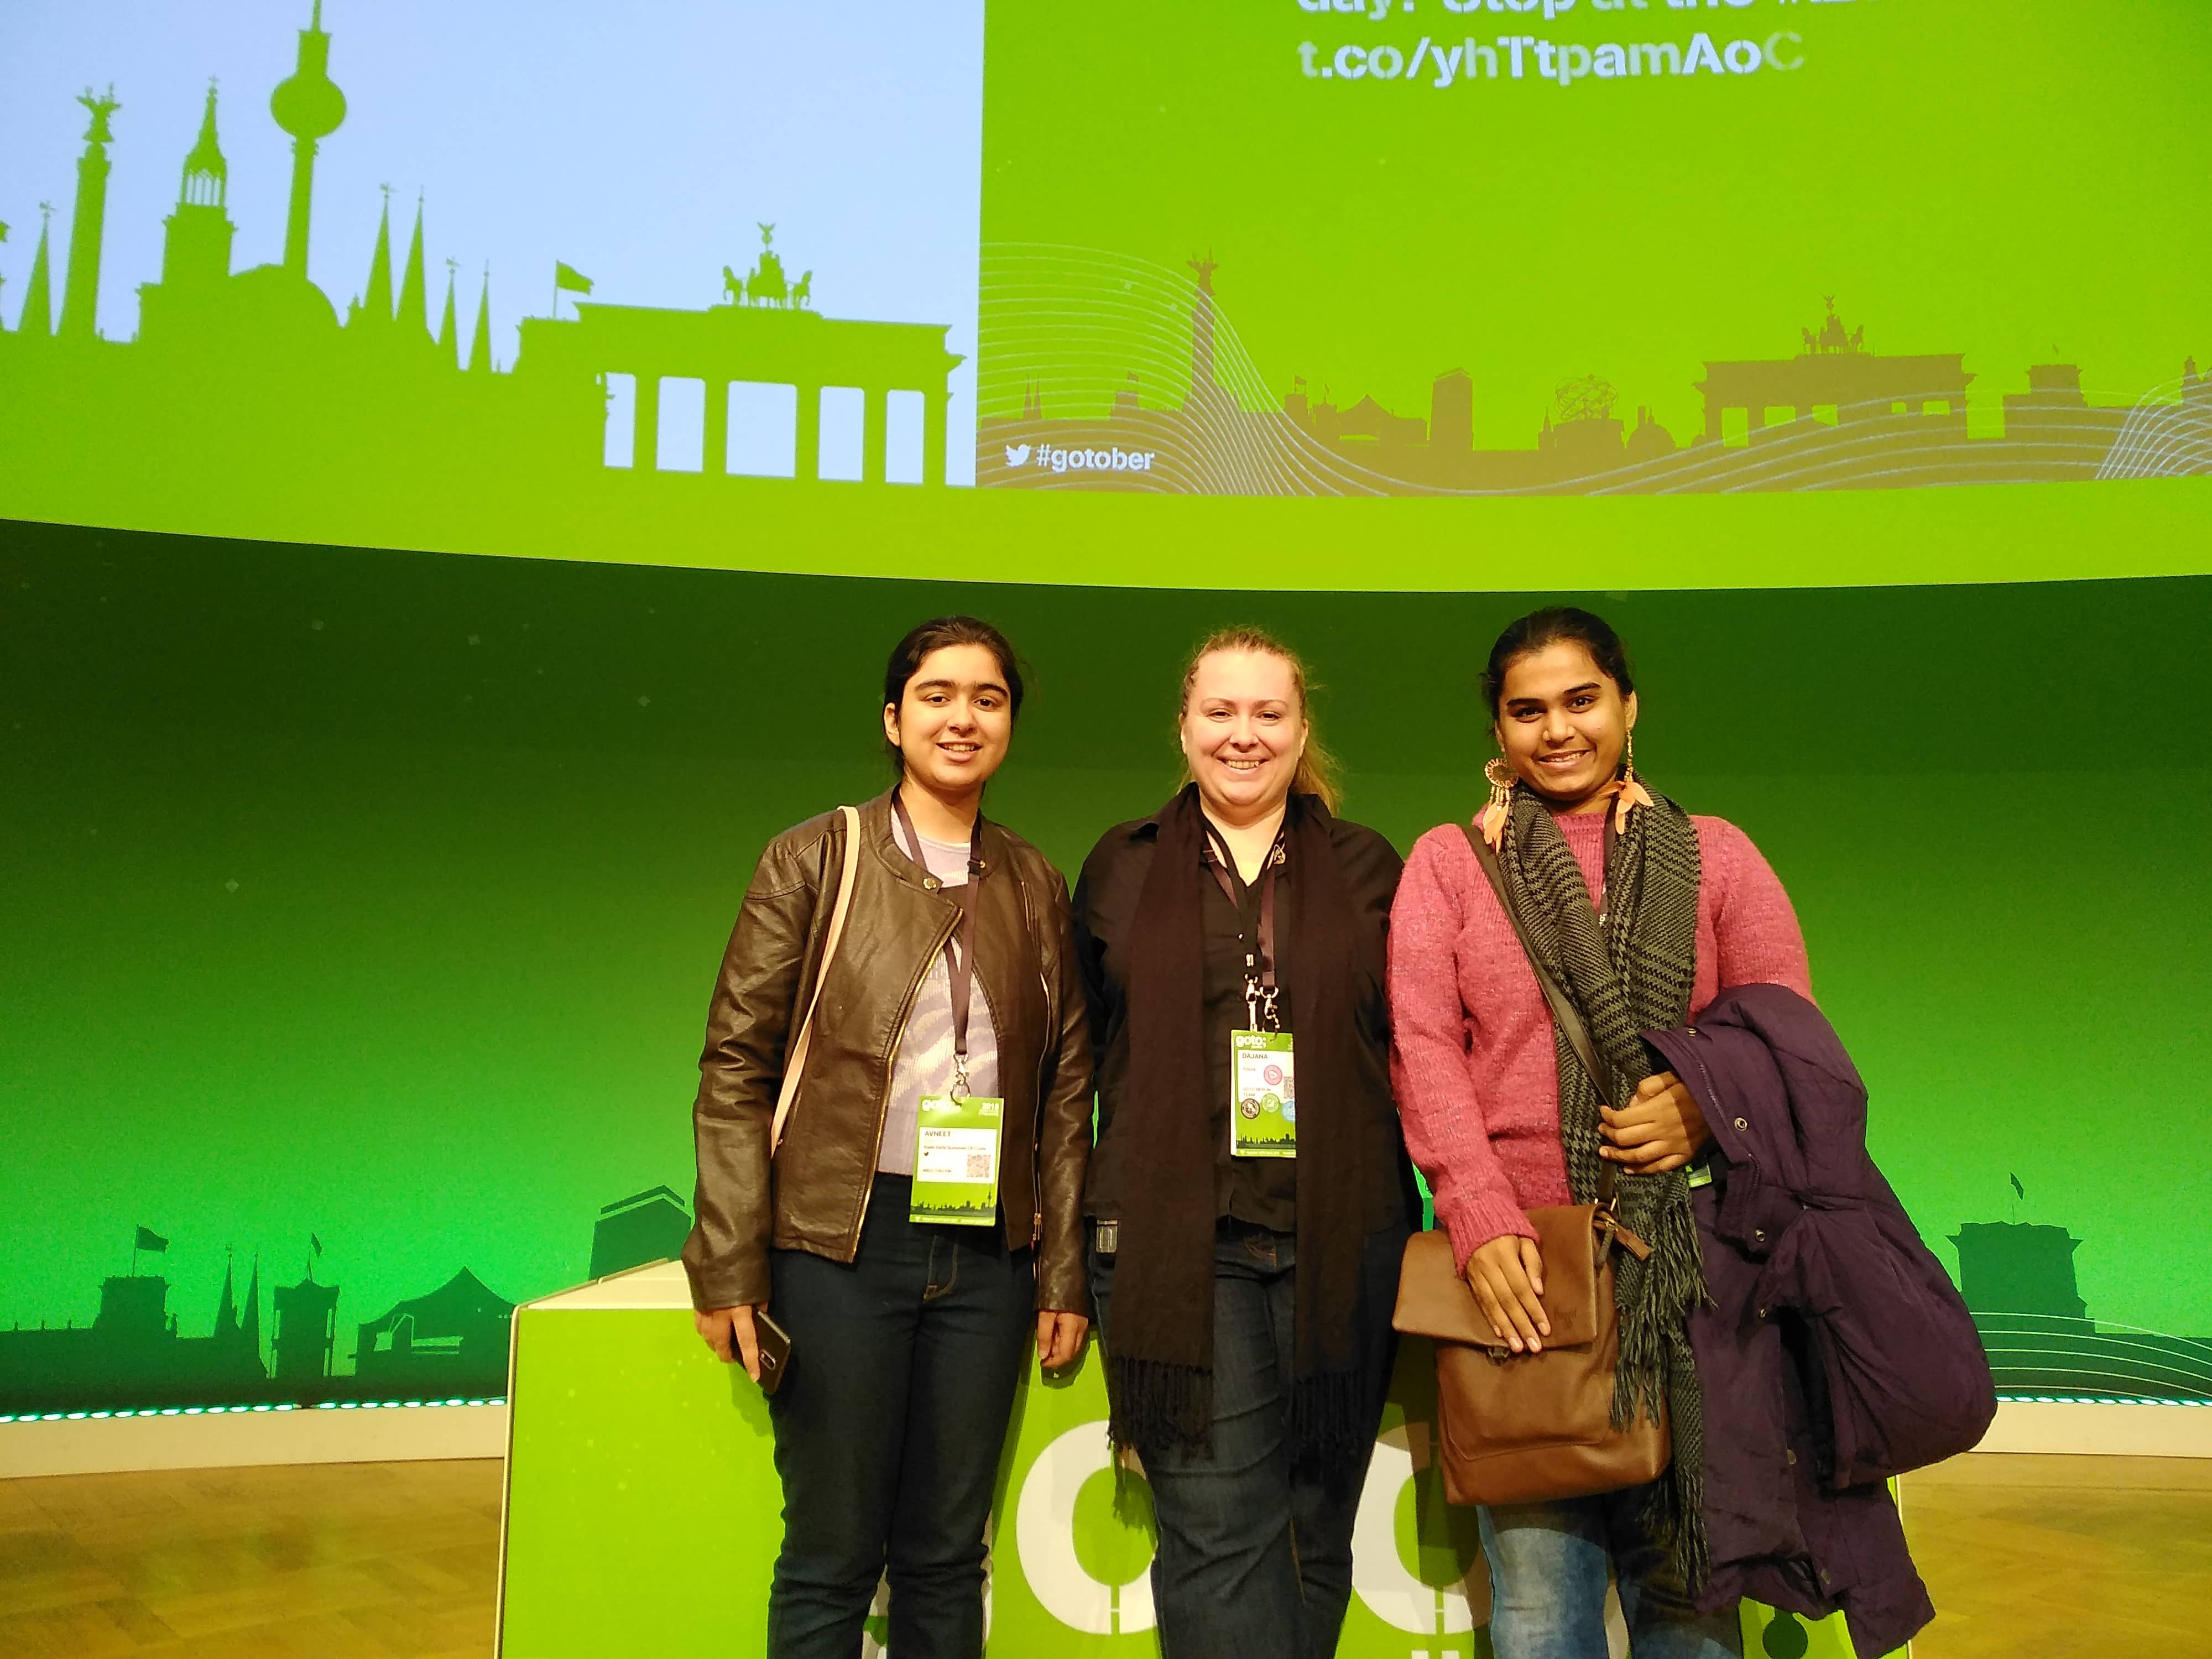 Avneet and Rupal from team Sectumsempra posing with Dajana, GOTO organiser